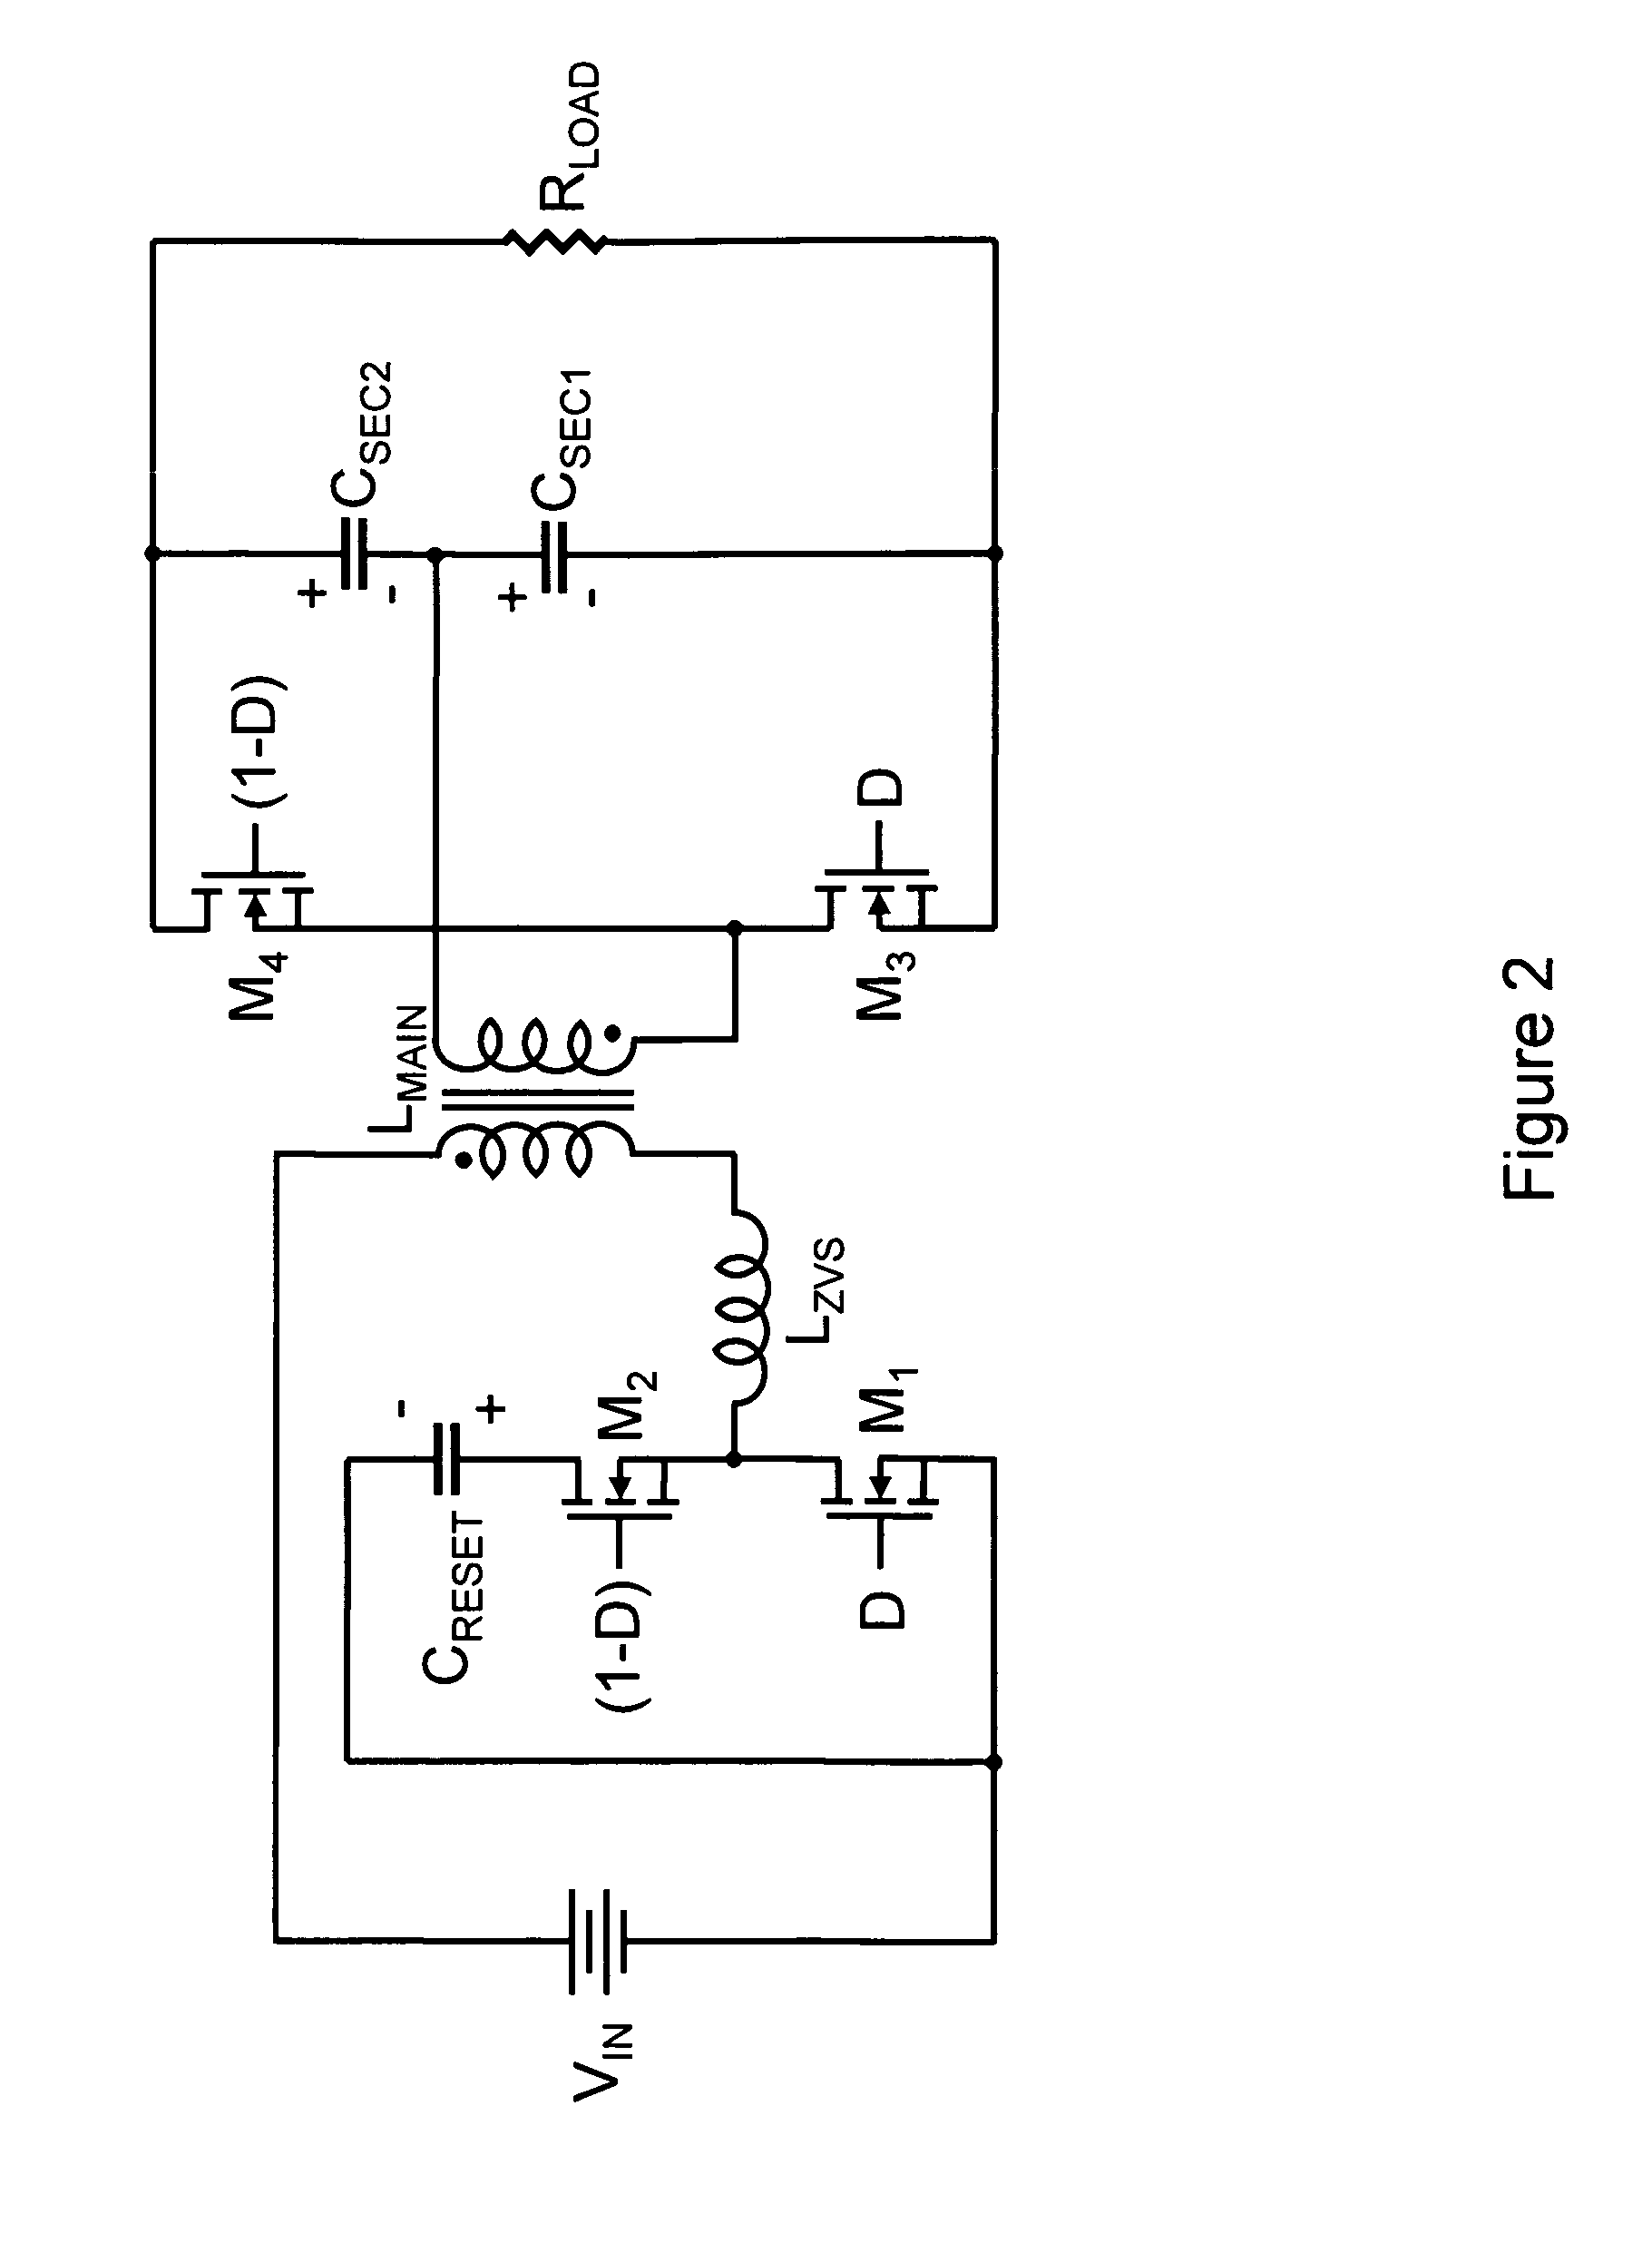 Zero voltage switching coupled inductor boost power converters